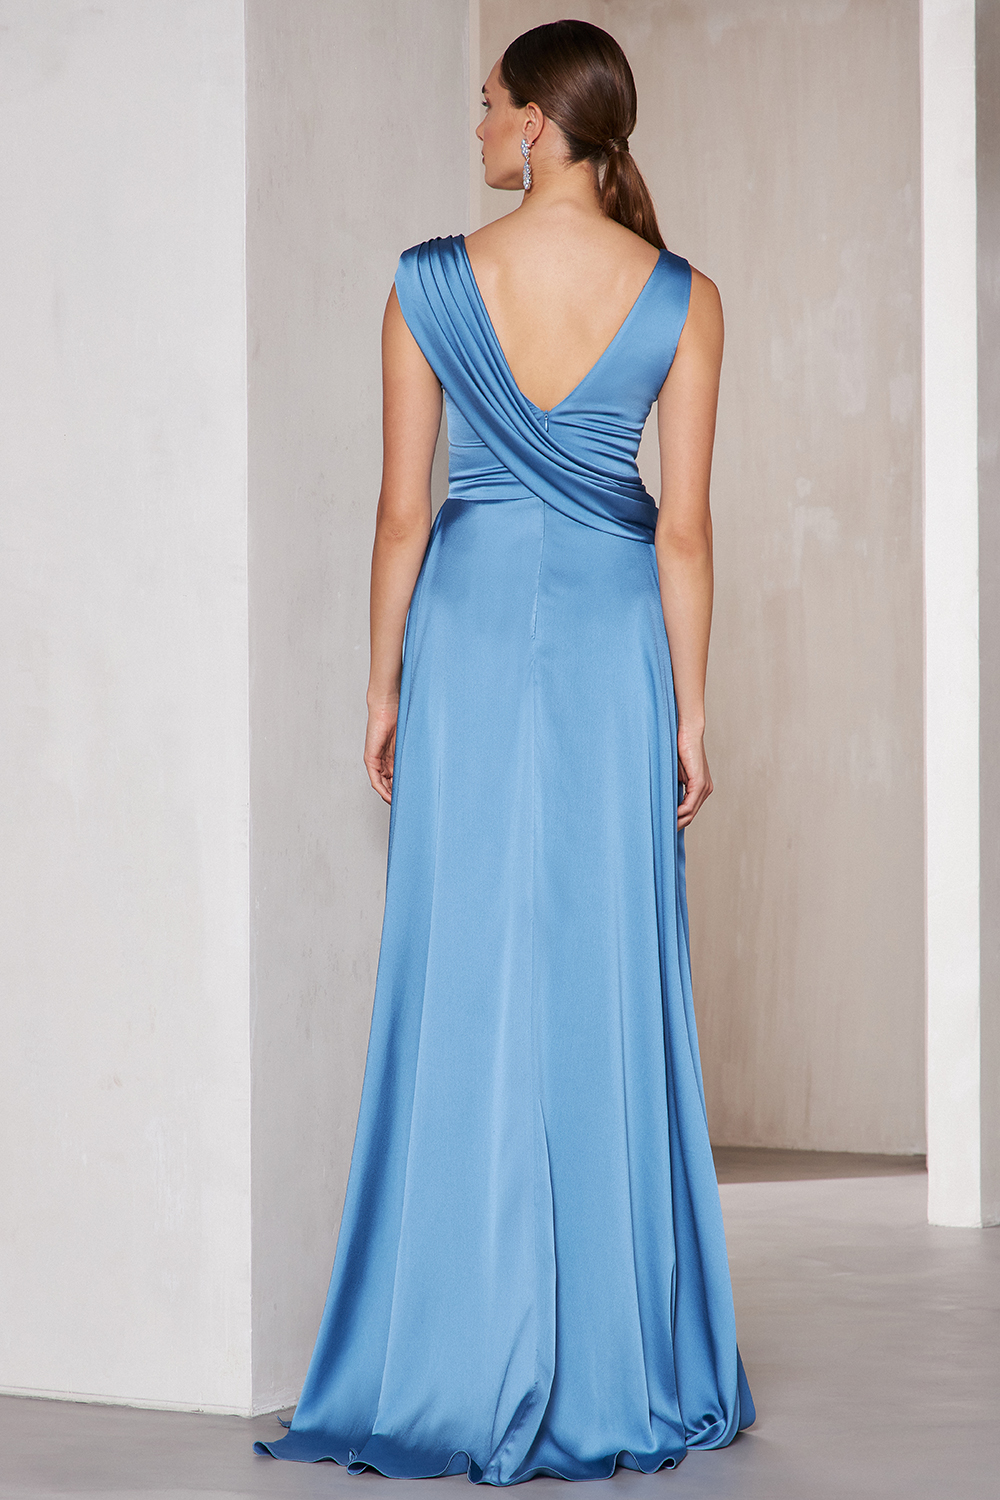 Long cocktail satin dress with wide straps